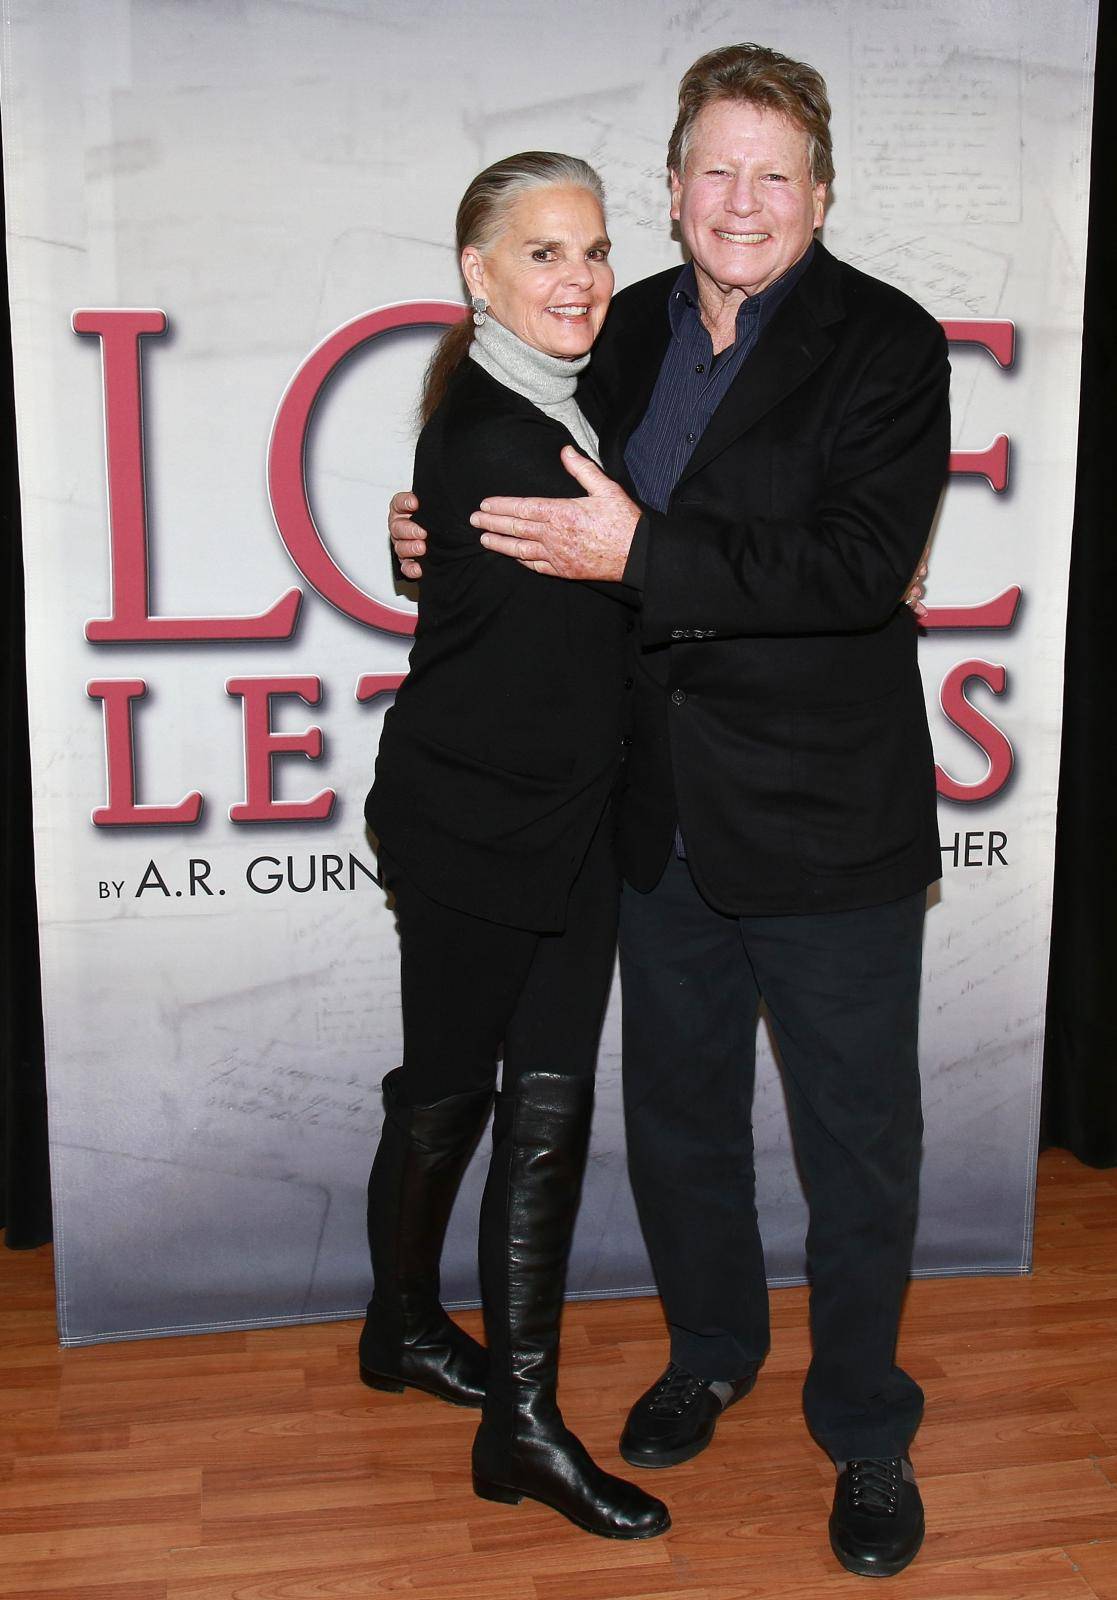 Love Story Stars Reunite for Love Letters Tour